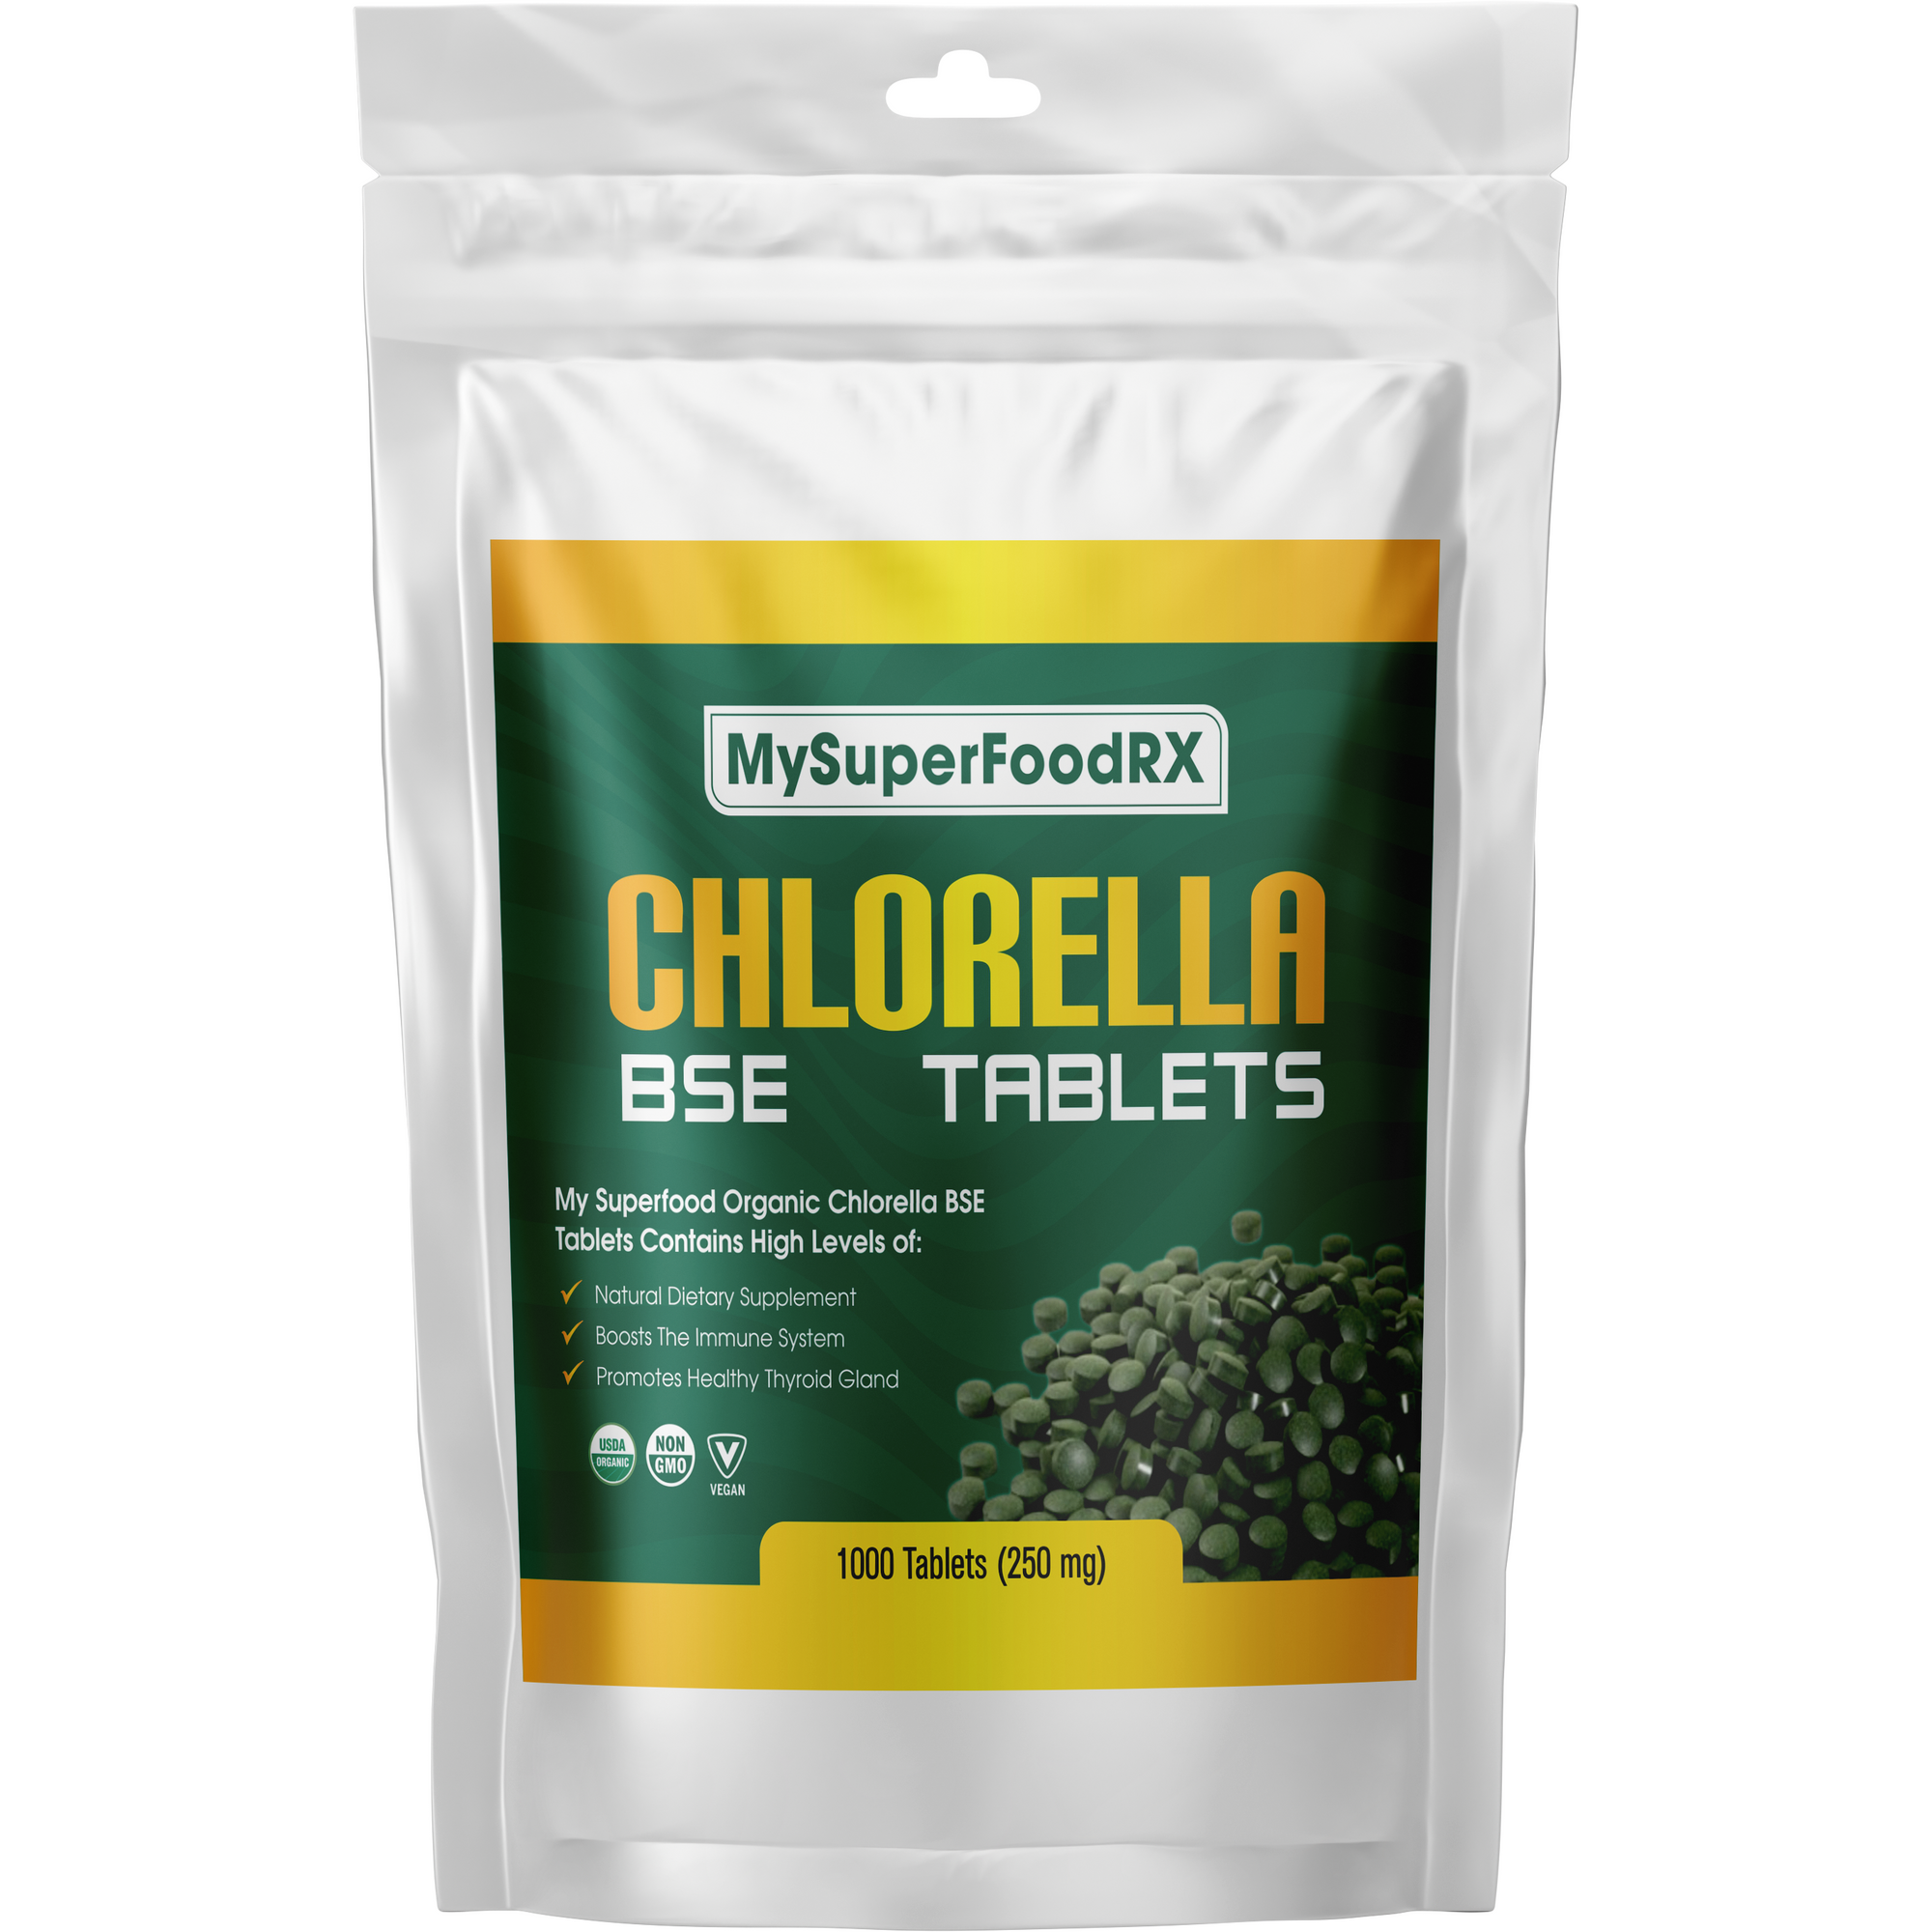 a bottle of my superfood rx cholorella bse tablets